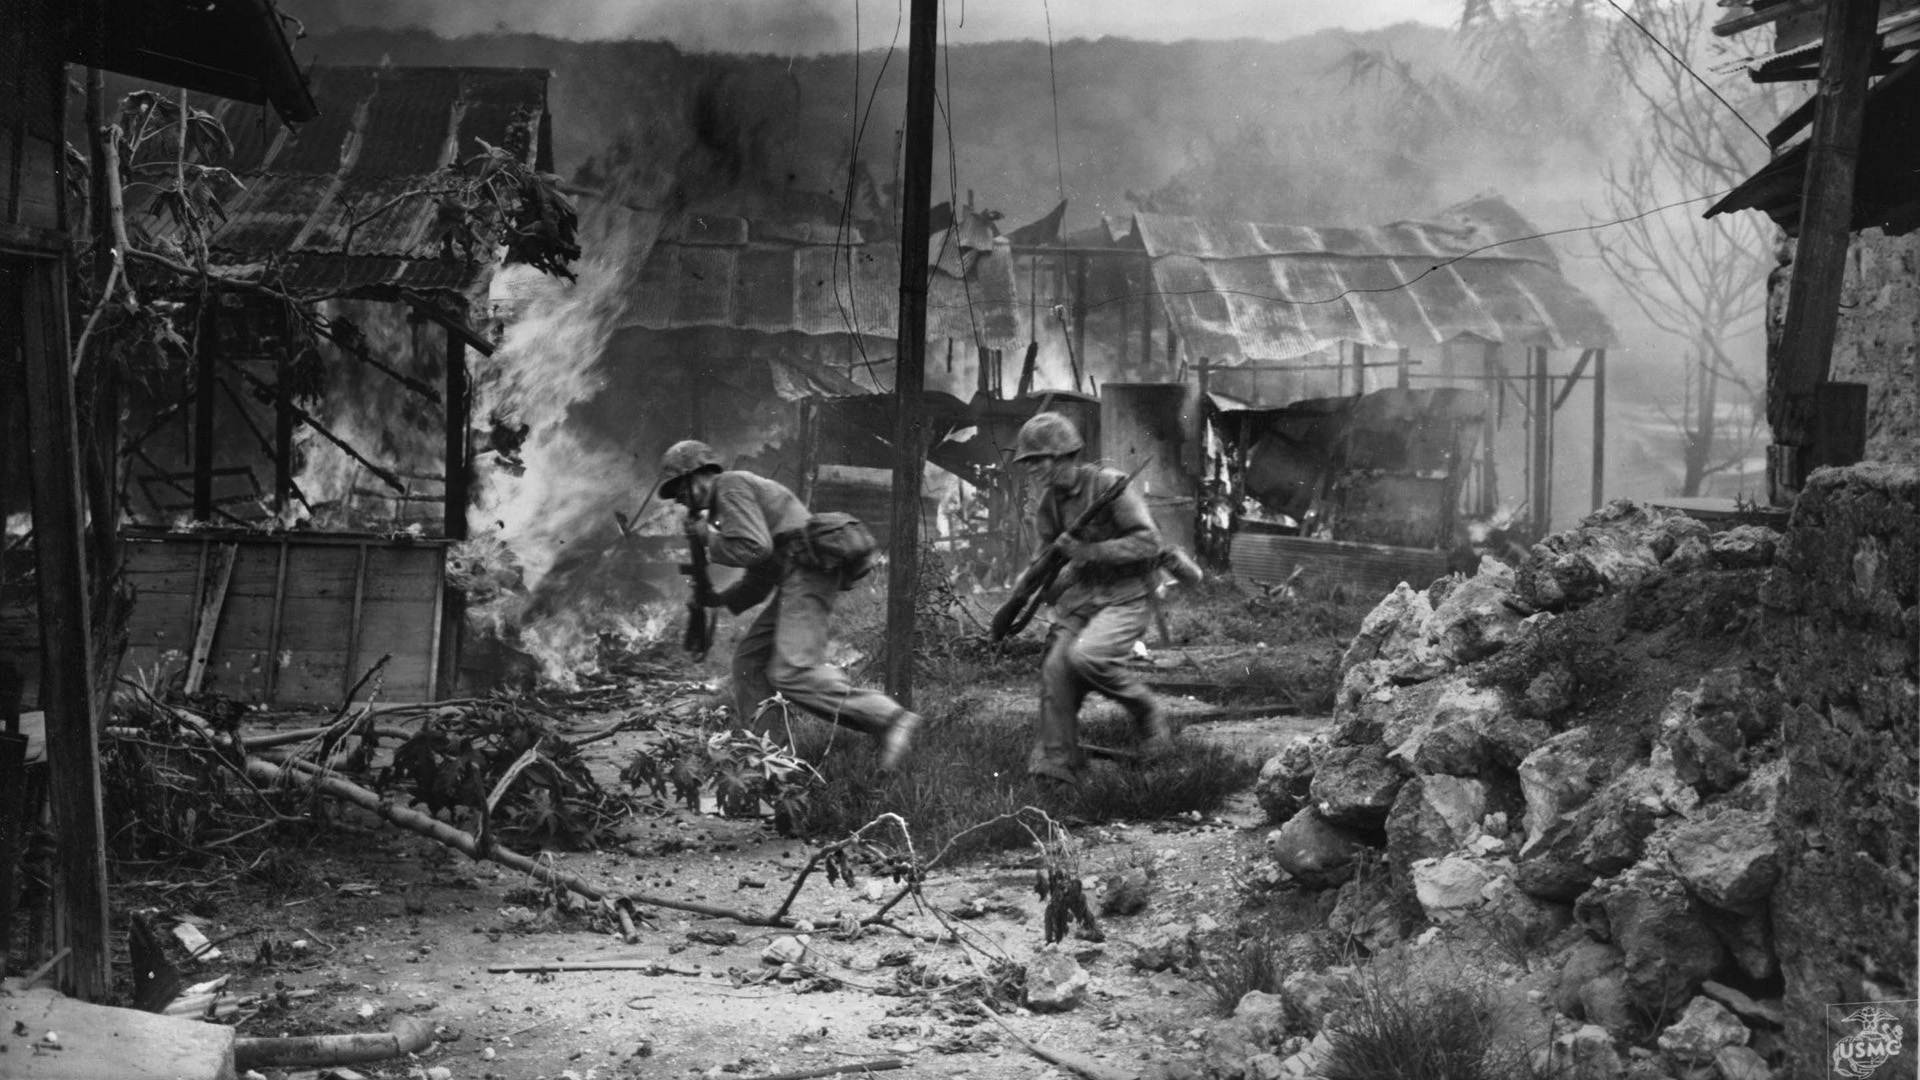 Under heavy fire from Japanese defenders, Marines move quickly through the rubble of Garapan, principal city on the island of Saipan. The battle for Garapan in July 1944 was the first experience of street fighting for American Marines in the Pacific.